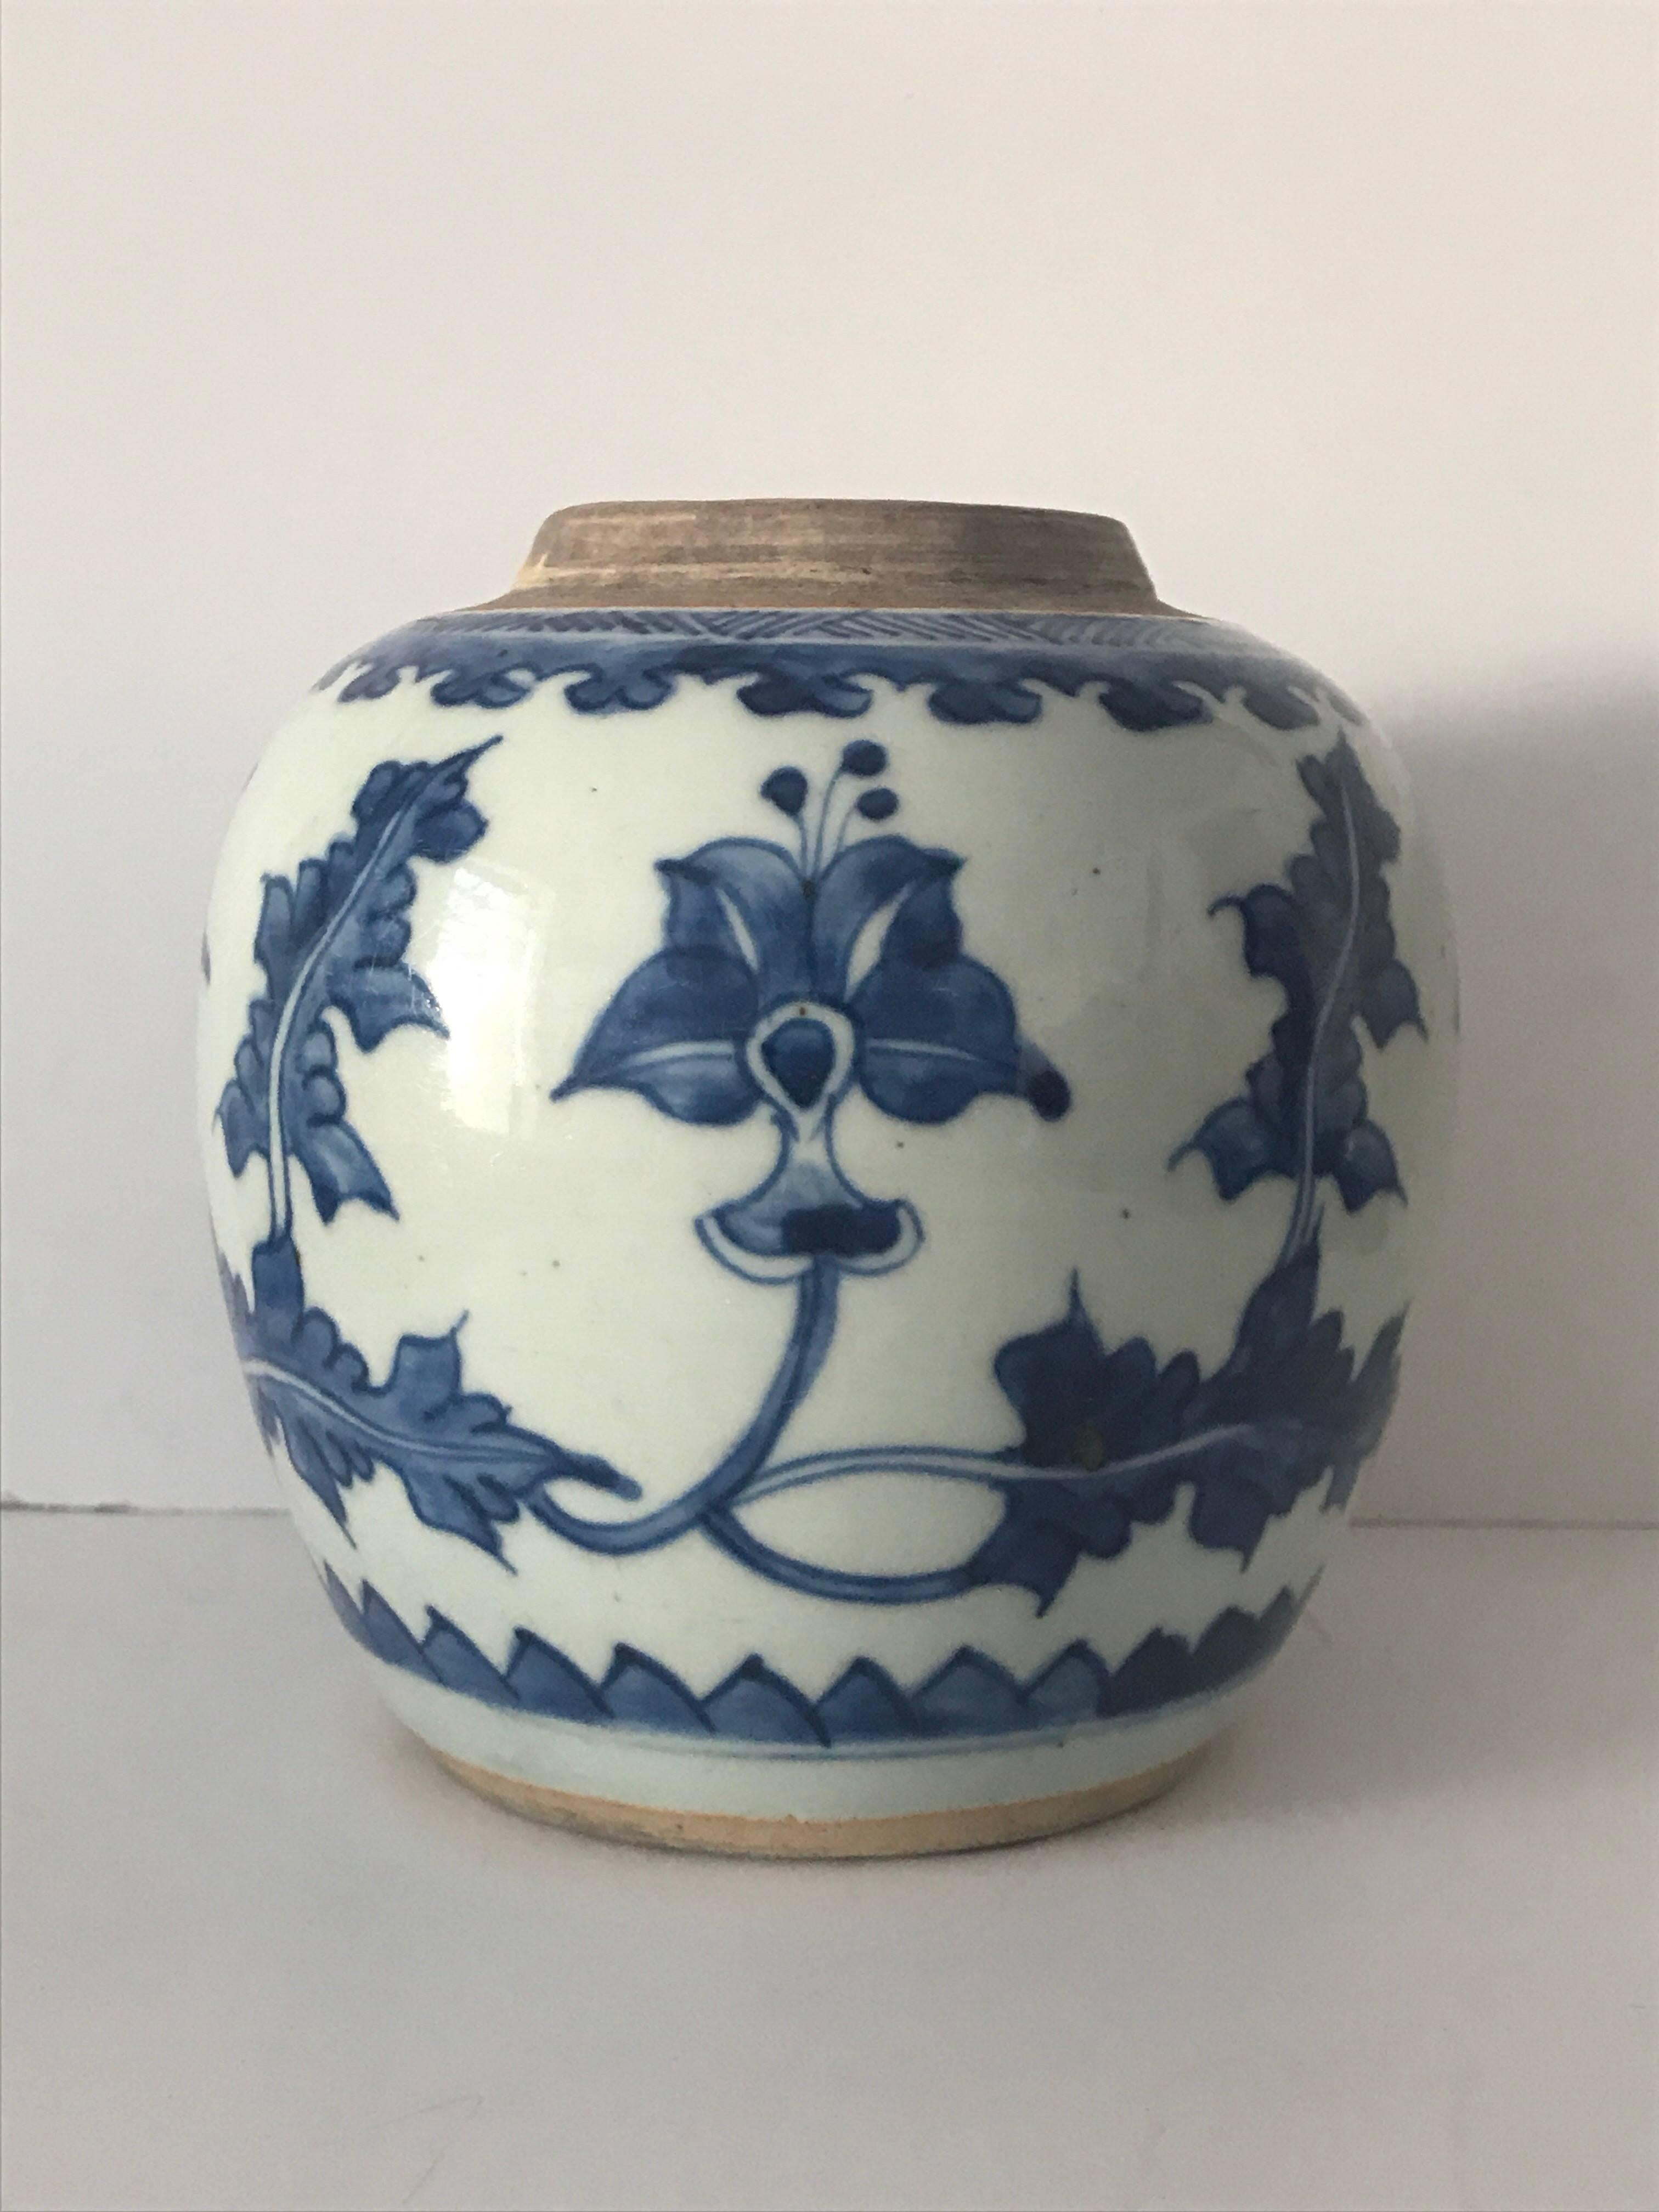 Chinese Blue and White 17th c Kangxi Jar 1662-1722.
A beautiful and nicely painted ginger jar from the late 17th c. The jar has a missing lid and it is in a very nice condition without any cracks, chips or damages. There are some minor firing